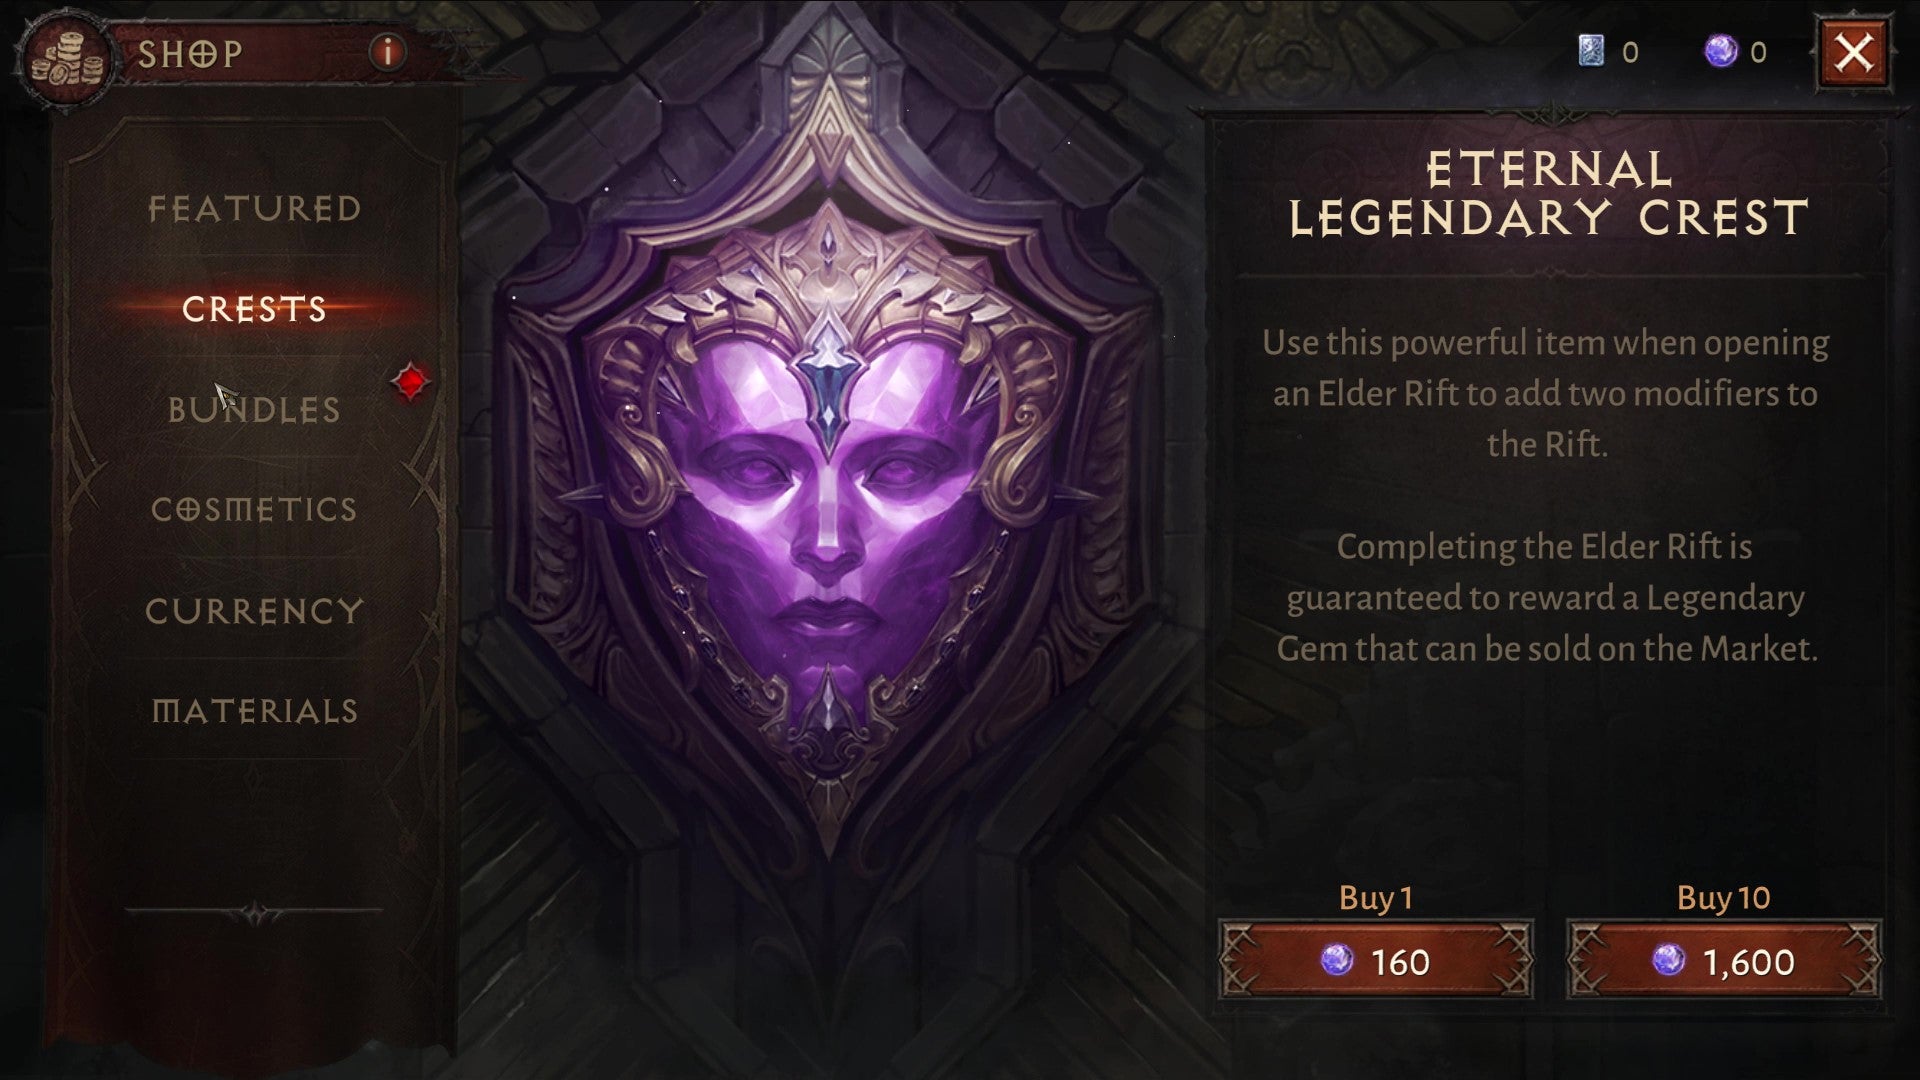 The Crests tab of the in-game store in Diablo Immortal.